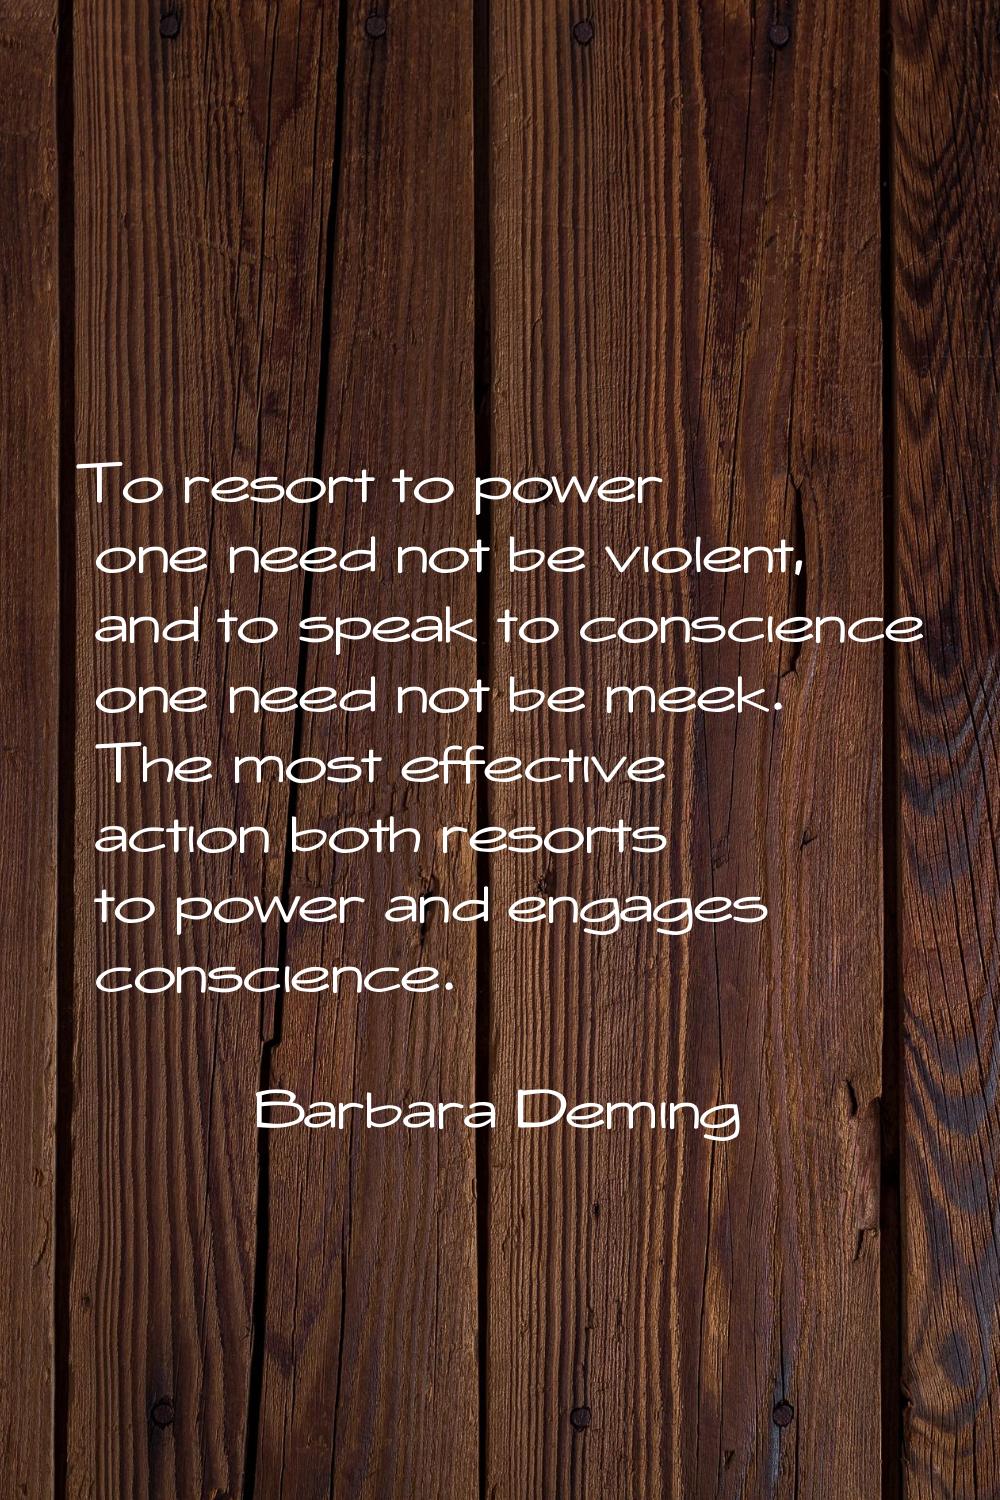 To resort to power one need not be violent, and to speak to conscience one need not be meek. The mo